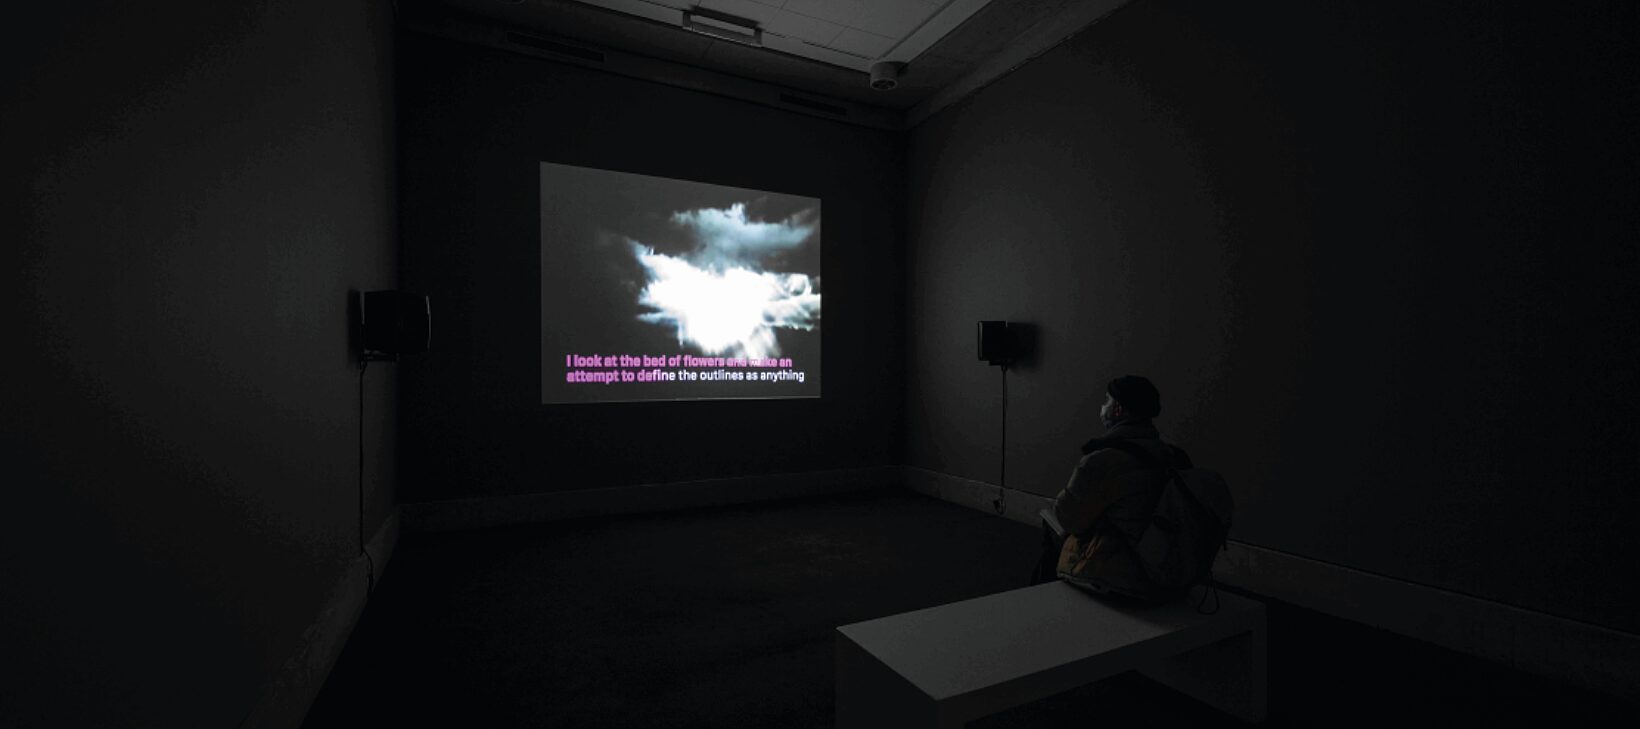 An image of a film work at a distance, in a dark room. Subtitles read "I look at a bed of flowers and make an attempt to define the outlines of everything."